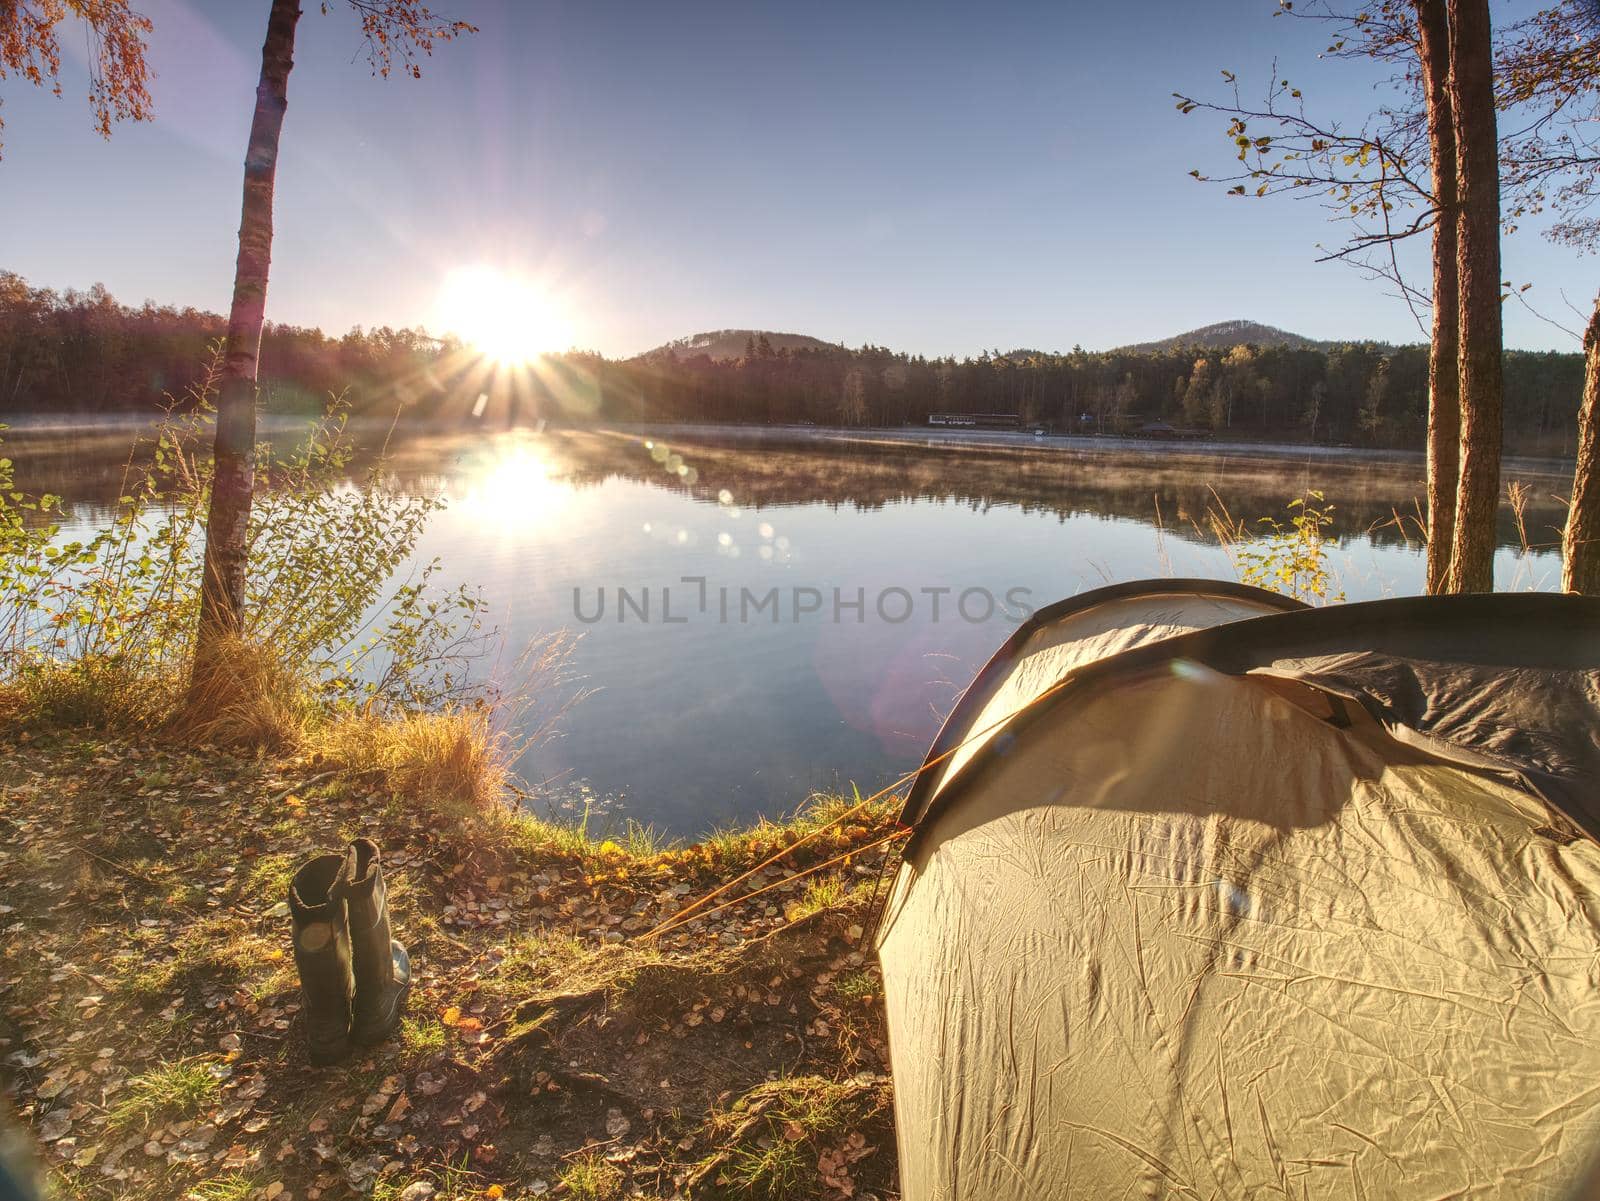 Tent on romantic place at lake. Colorful fall forest by rdonar2